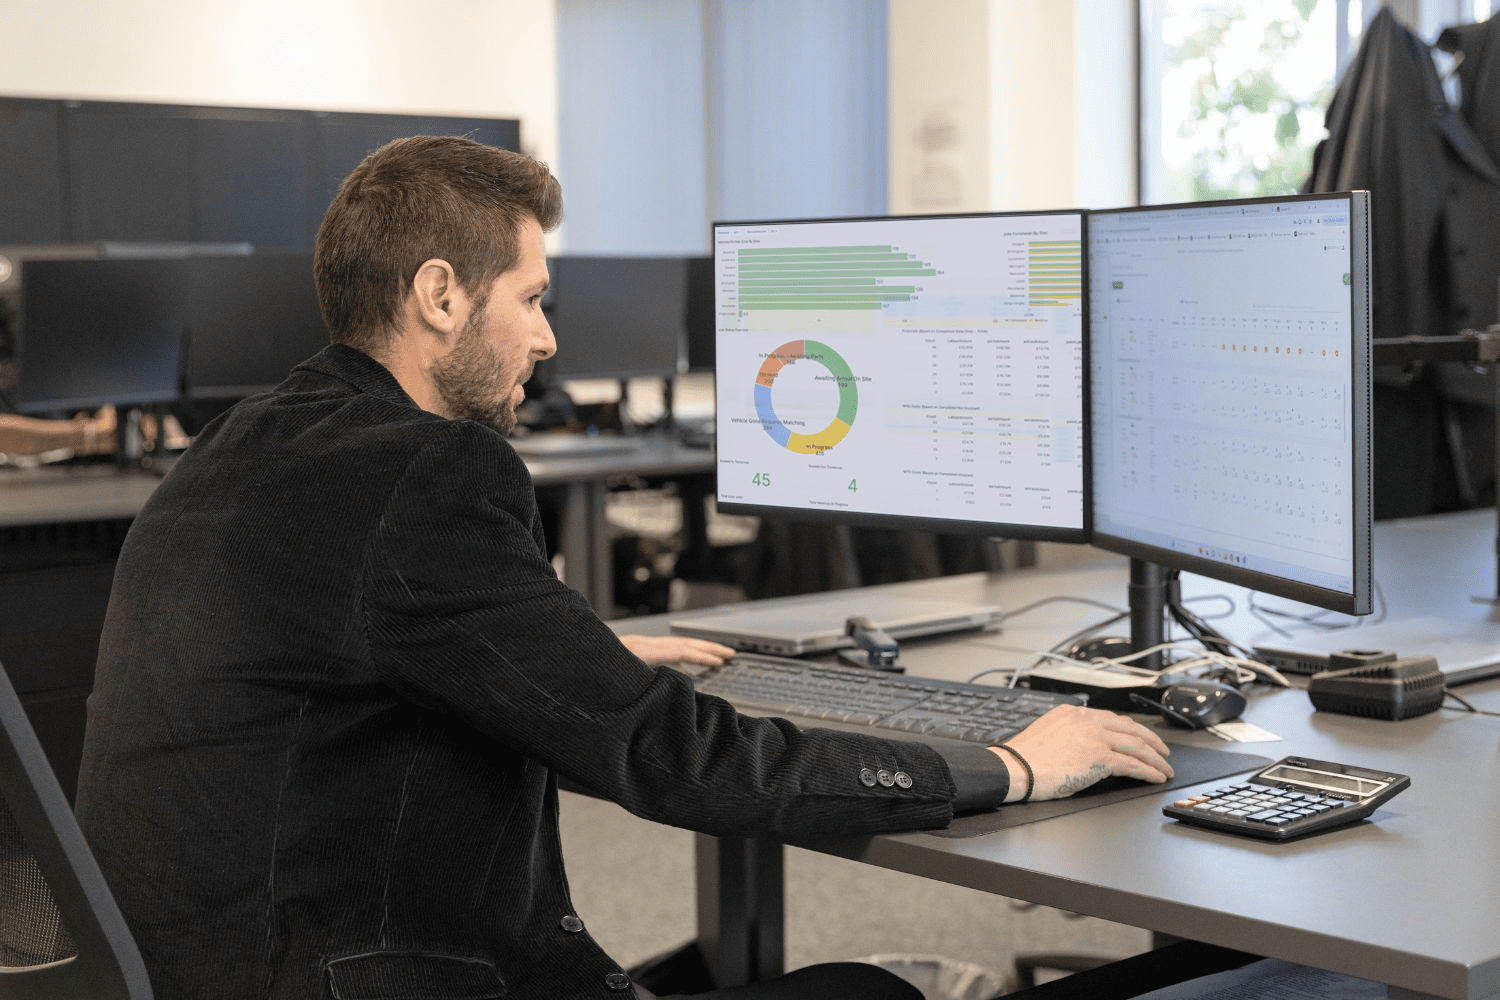 A bodyshop manager sitting in the office of a repair shop, tracking live business performance data and employee productivity insights through the intuitive bodyshop management system, Onyx BMS.